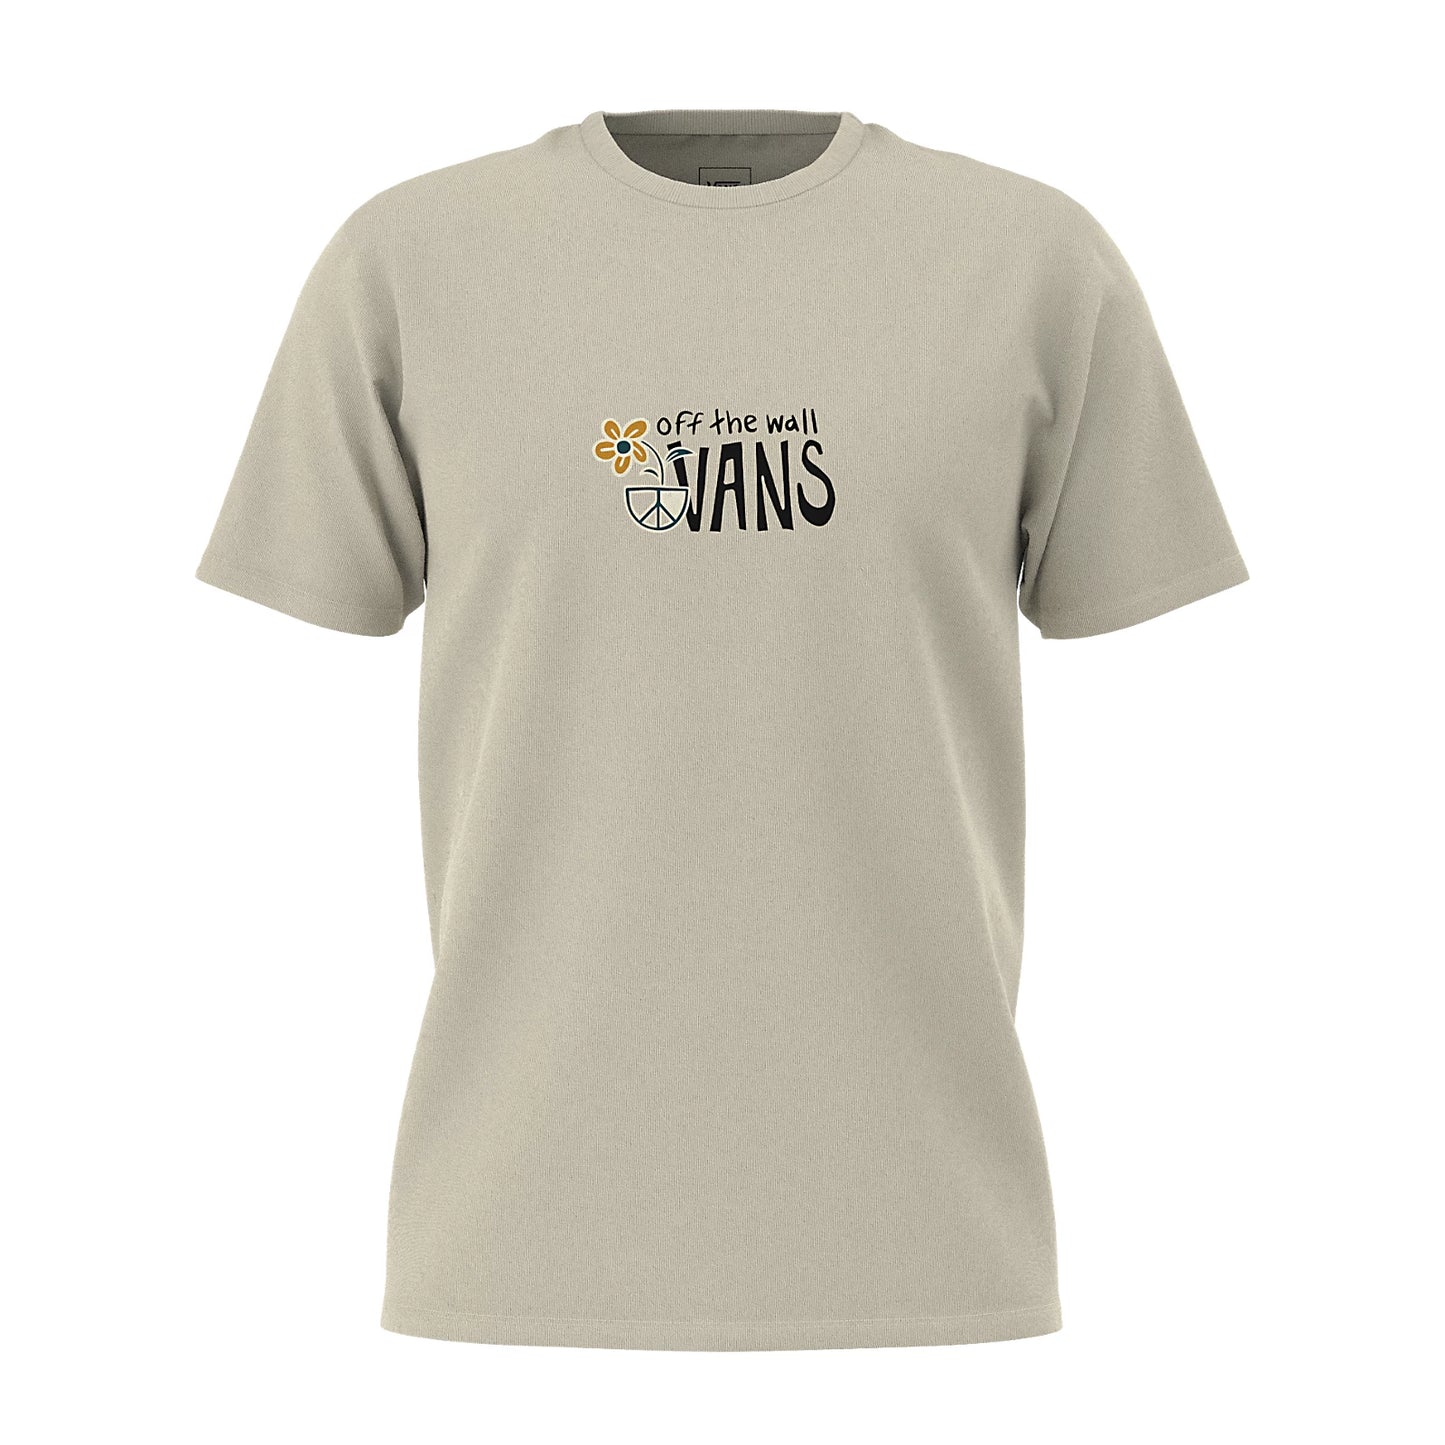 VANS - IN OUR HANDS SS TEE KIDS - ANTIQUE WHITE